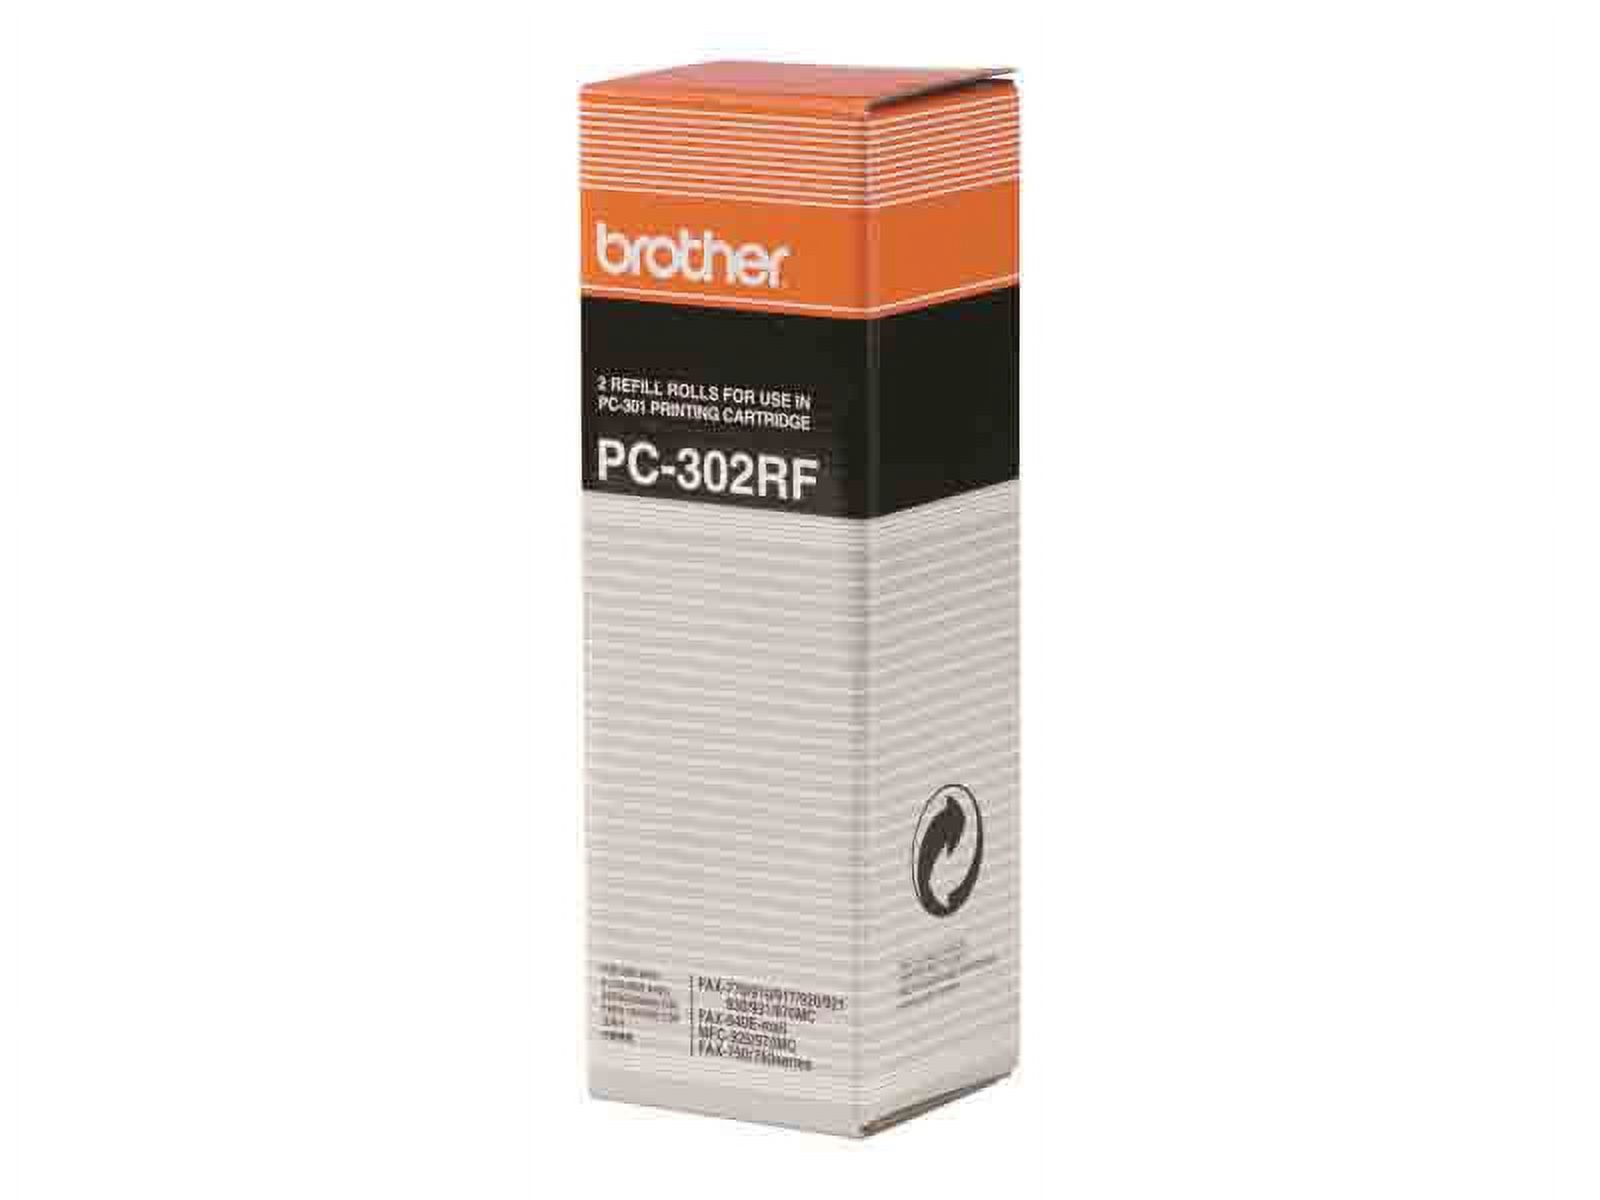 Brother PC302RF Thermal Transfer Refill Rolls, 2/BX - image 1 of 2